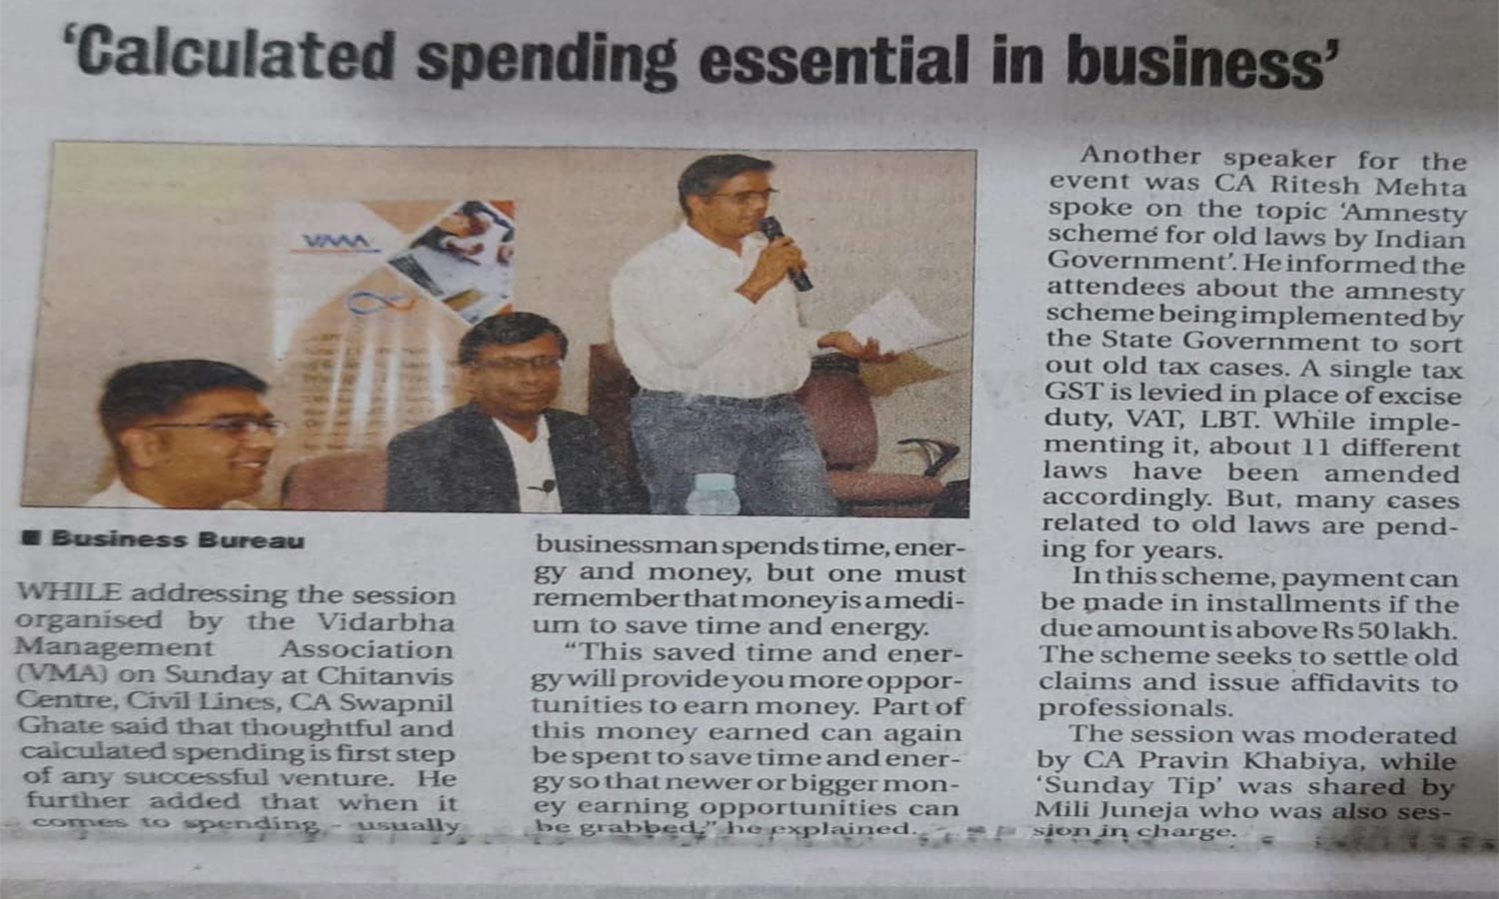 SUNDAY LECTURE AT THE VIDARBHA MANAGEMENT ASSOCIATION (VMA) ON THE 7 SPENDING SECRETS OF HAPPY BALANCE SHEET